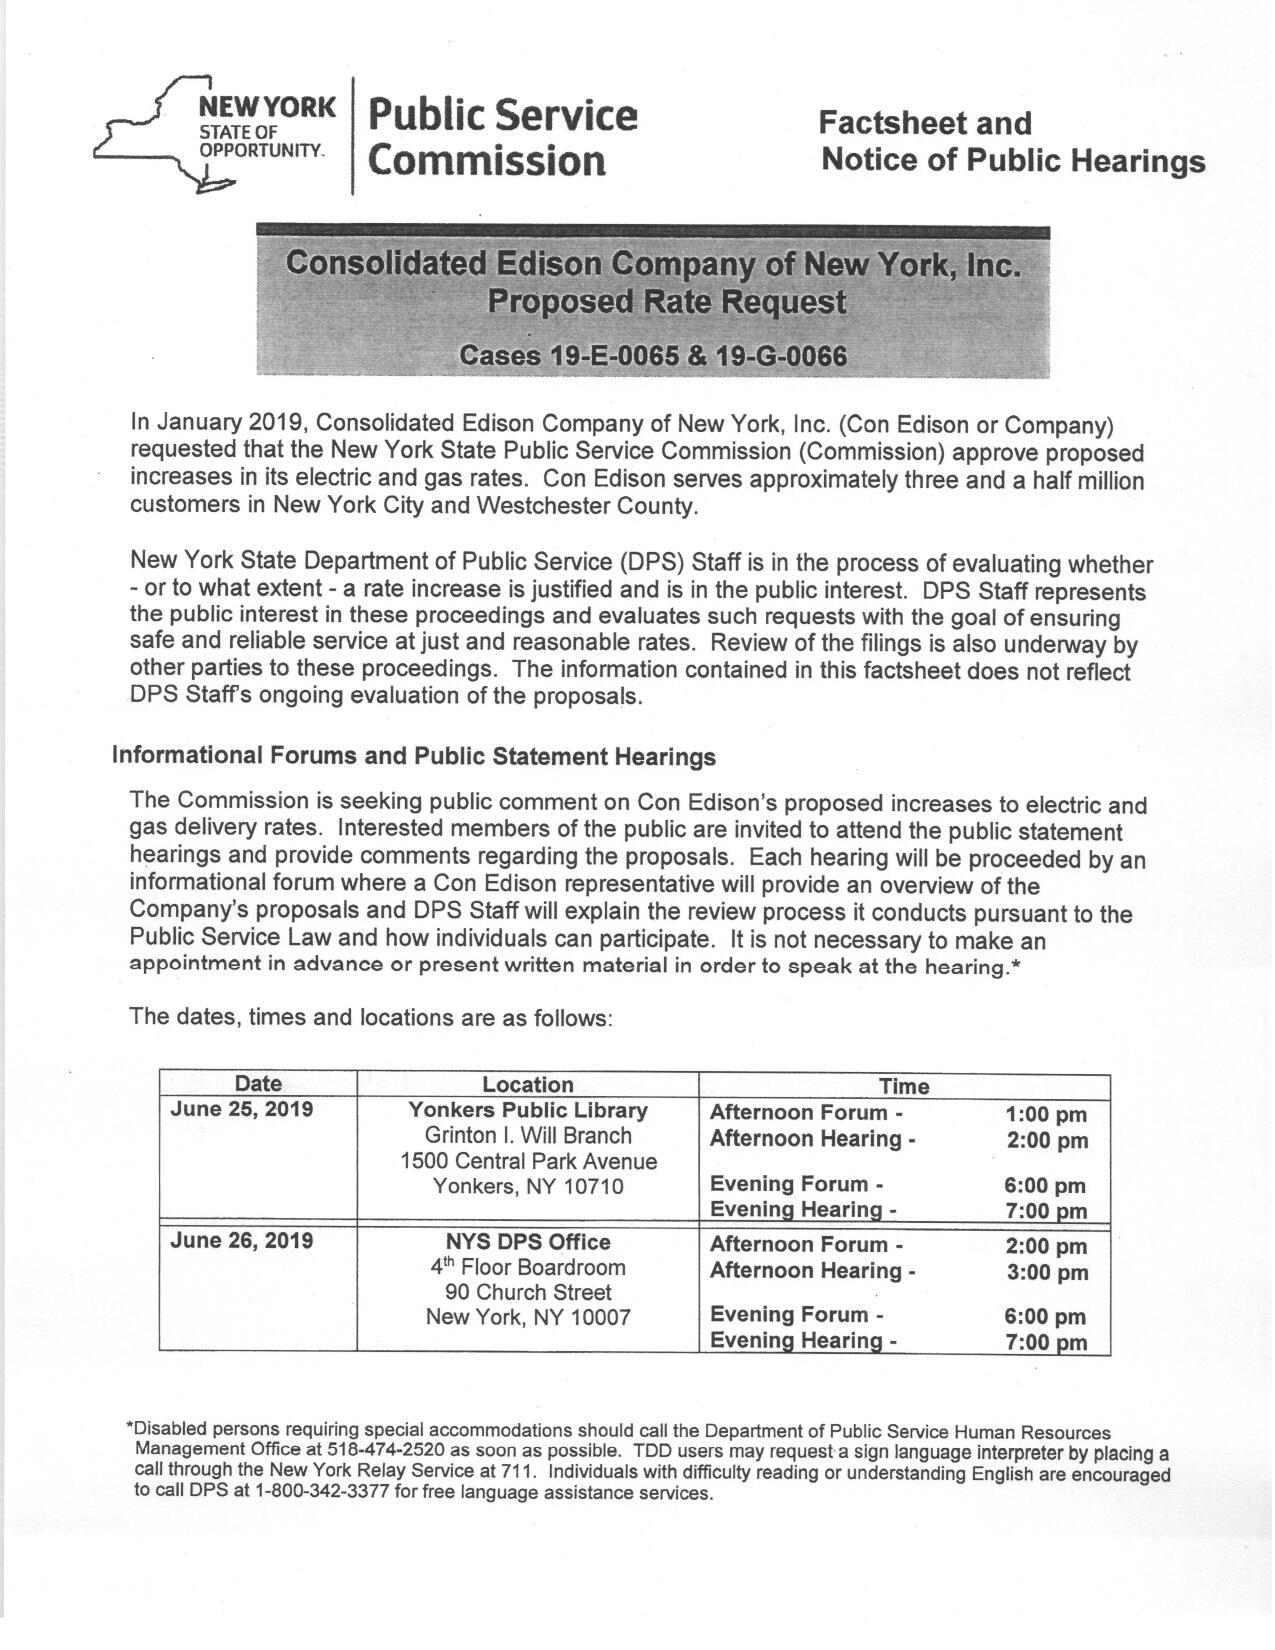 Con Ed proposed rate increase Public Hearing_Page_1